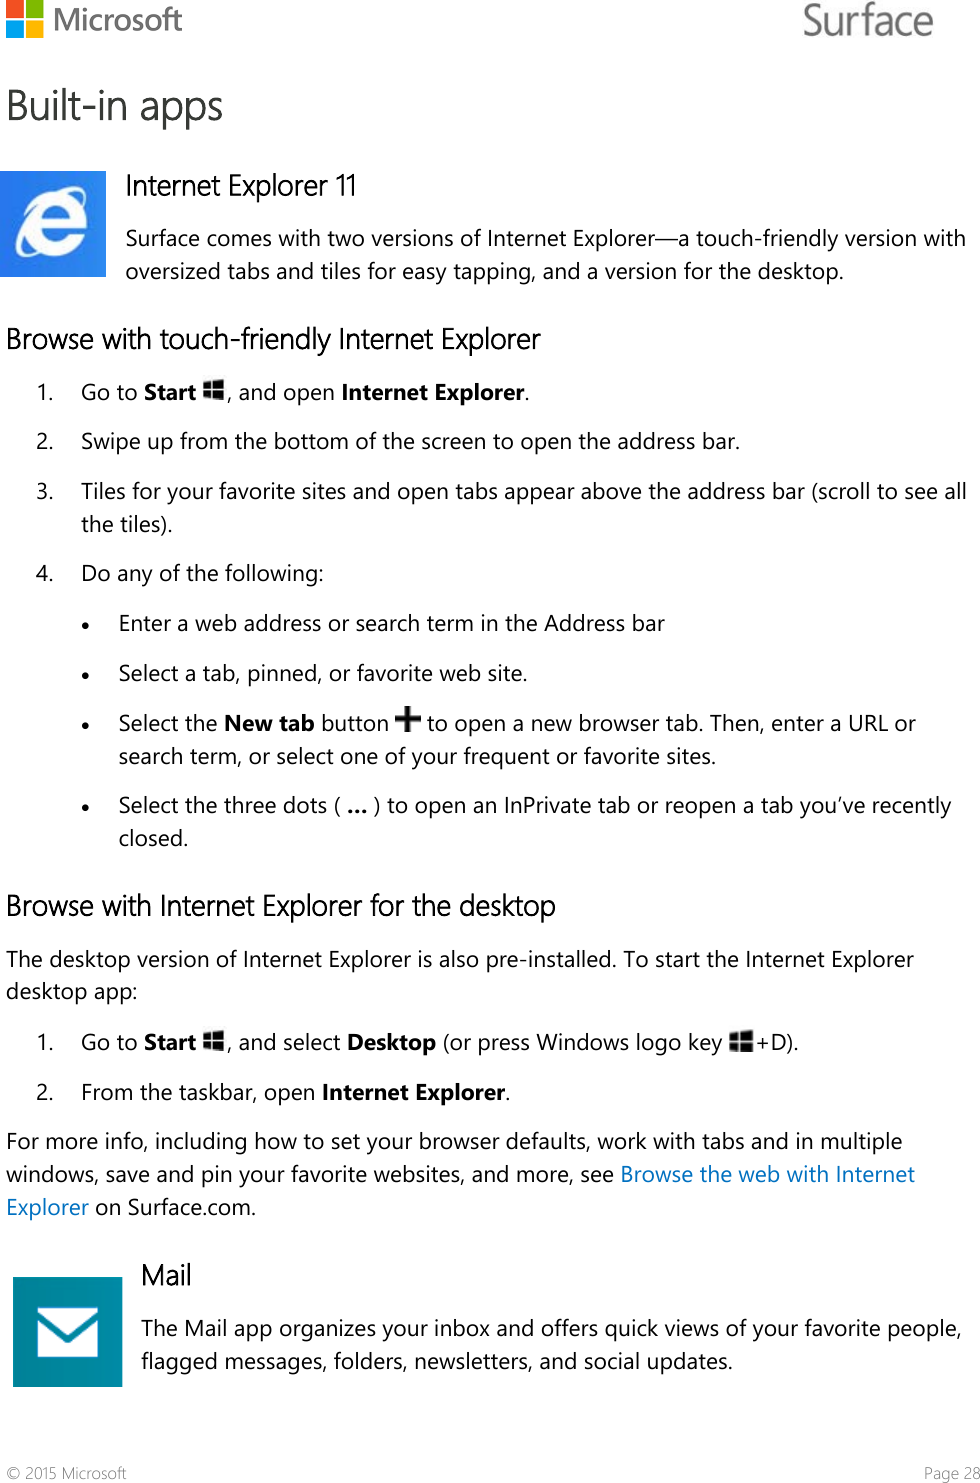    Built-in apps Internet Explorer 11 Surface comes with two versions of Internet Explorer—a touch-friendly version with oversized tabs and tiles for easy tapping, and a version for the desktop.  Browse with touch-friendly Internet Explorer 1. Go to Start , and open Internet Explorer. 2. Swipe up from the bottom of the screen to open the address bar.  3. Tiles for your favorite sites and open tabs appear above the address bar (scroll to see all the tiles). 4. Do any of the following:  • Enter a web address or search term in the Address bar • Select a tab, pinned, or favorite web site.  • Select the New tab button   to open a new browser tab. Then, enter a URL or search term, or select one of your frequent or favorite sites.  • Select the three dots ( … ) to open an InPrivate tab or reopen a tab you’ve recently closed.  Browse with Internet Explorer for the desktop  The desktop version of Internet Explorer is also pre-installed. To start the Internet Explorer desktop app: 1. Go to Start , and select Desktop (or press Windows logo key  +D).   2. From the taskbar, open Internet Explorer.  For more info, including how to set your browser defaults, work with tabs and in multiple windows, save and pin your favorite websites, and more, see Browse the web with Internet Explorer on Surface.com. Mail The Mail app organizes your inbox and offers quick views of your favorite people, flagged messages, folders, newsletters, and social updates.  © 2015 Microsoft    Page 28 